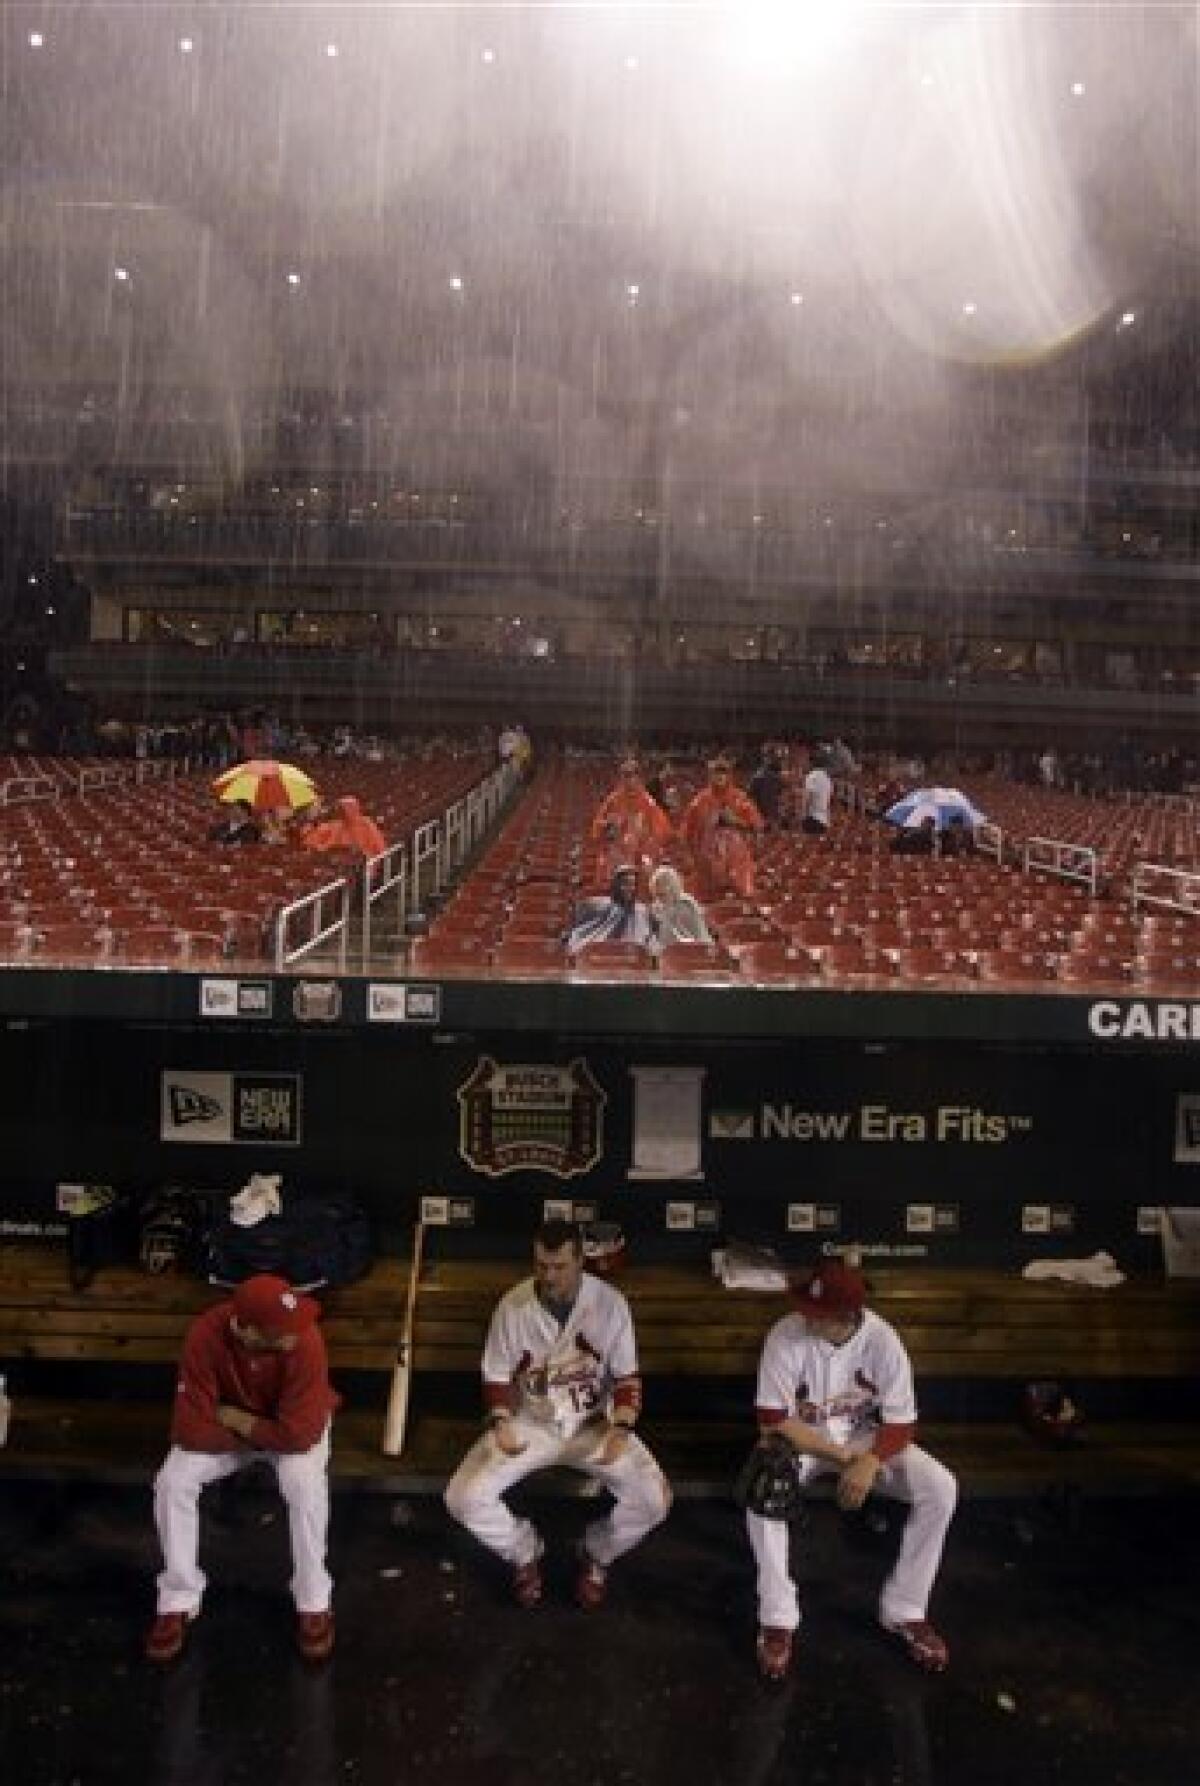 Cardinals game delayed by severe weather